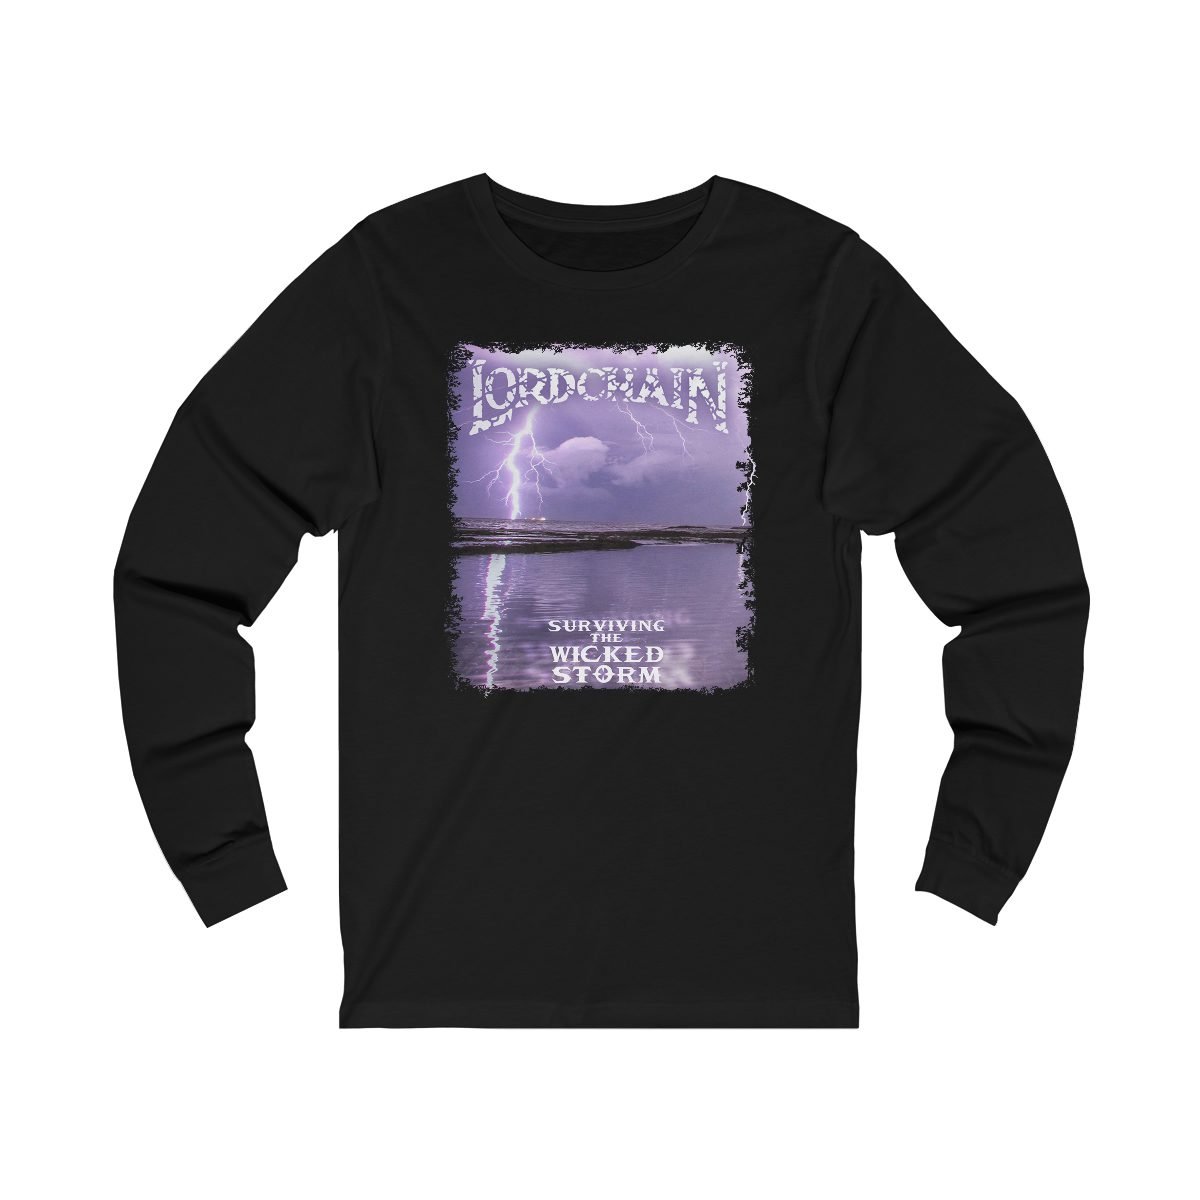 Lordchain – Surviving The Wicked Storm Long Sleeve Tshirt